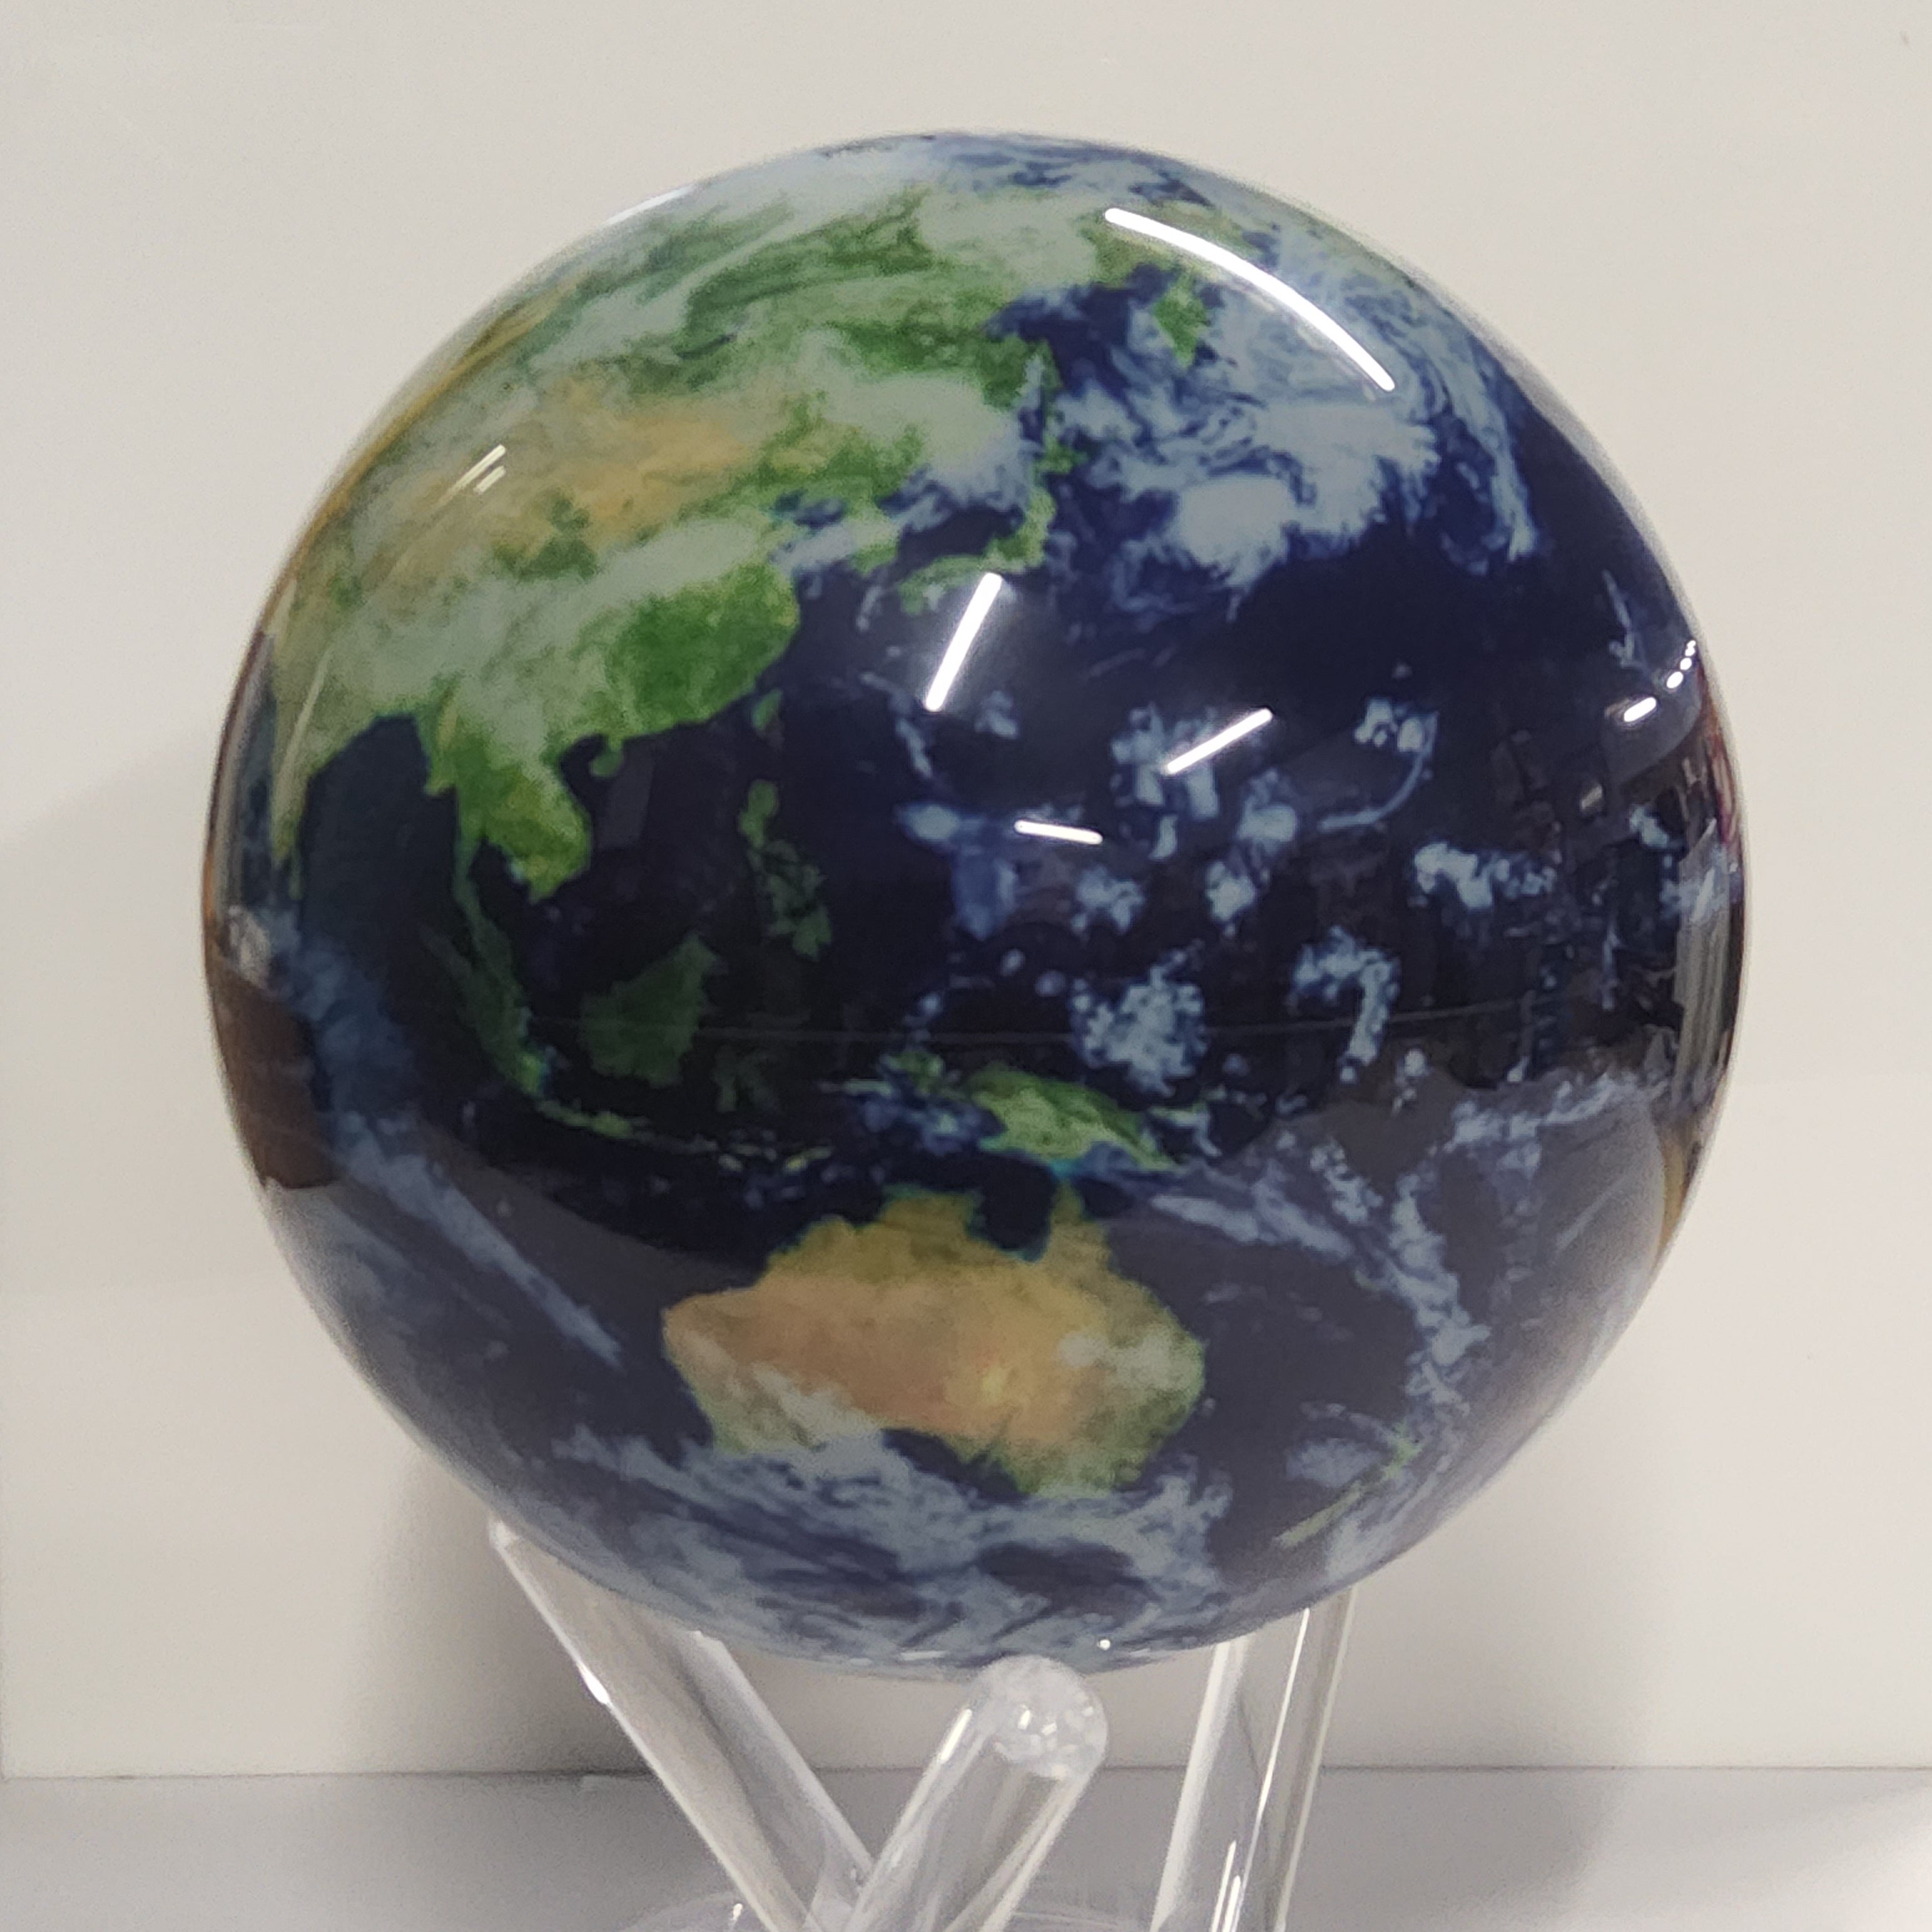 Mova Motion Globe - Earth with Clouds 6" MG-6-STE-C